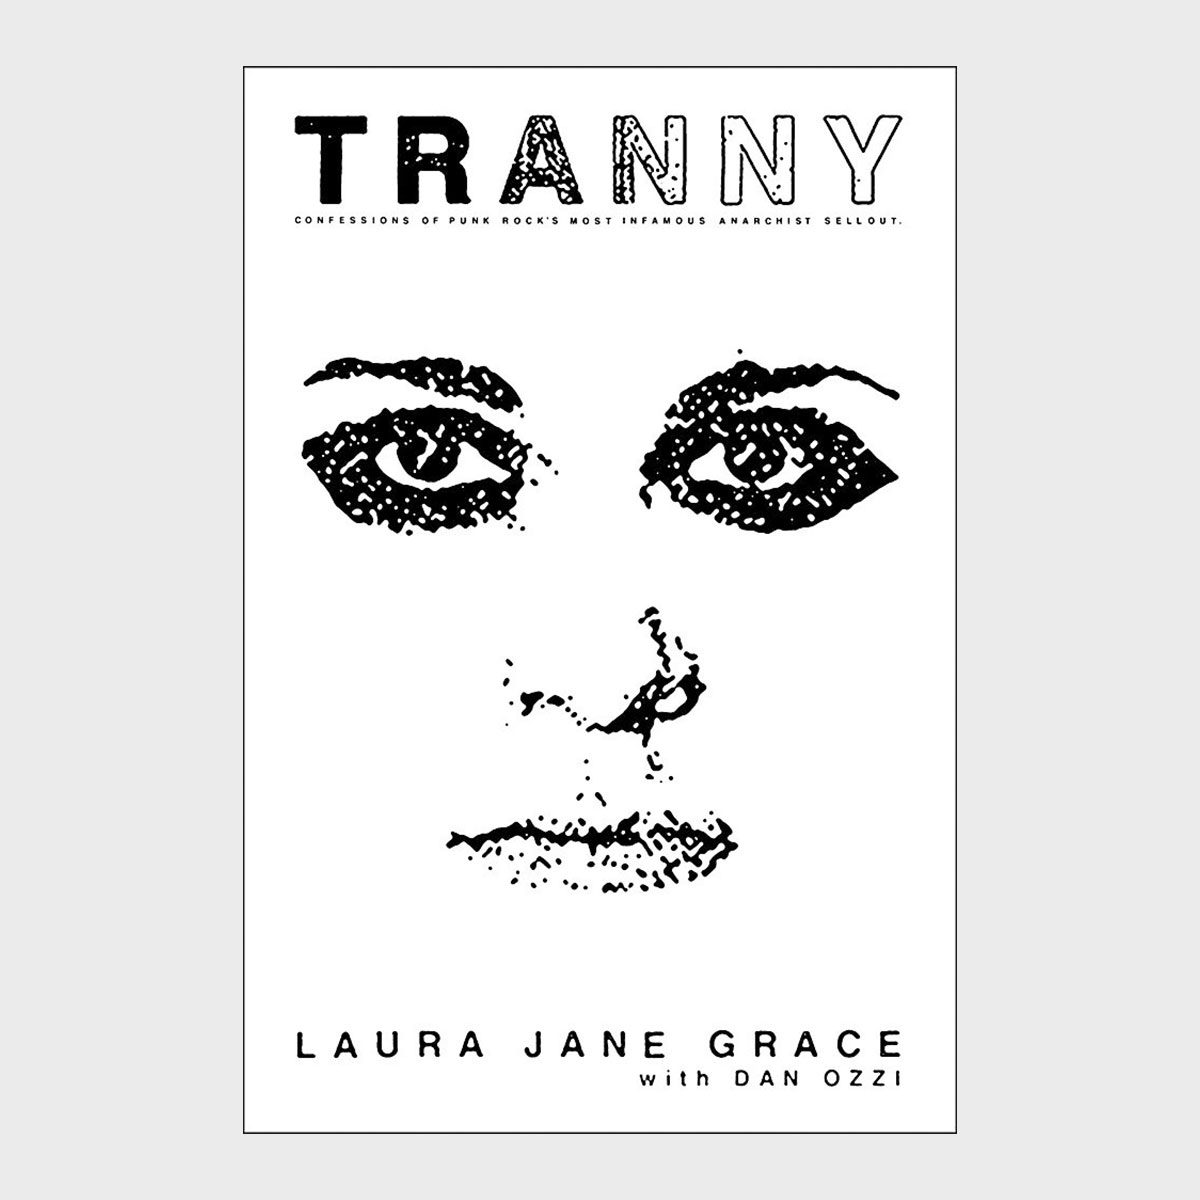 Tranny Confessions Of Punk Rock's Most Infamous Anarchist Sellout By Laura Jane Grace With Dan Ozzi Ecomm Via Amazon.com